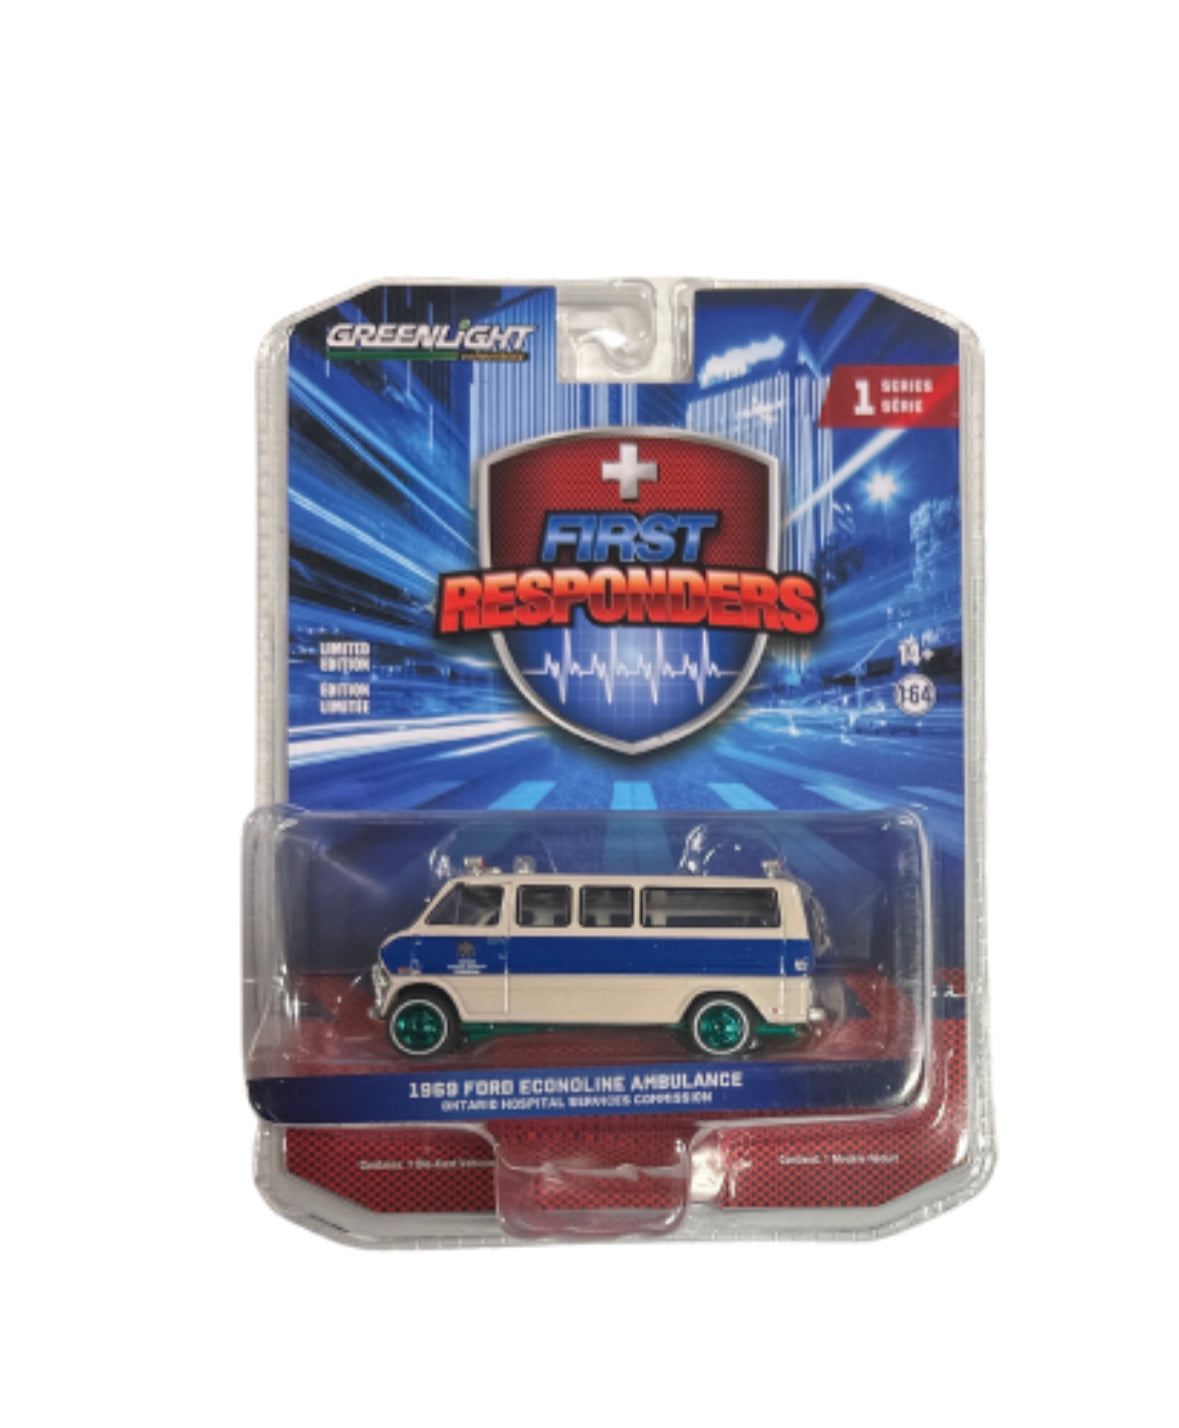 1/64 1969 FORD ECONOLINE AMBULANCE - FIRST RESPONDER "CHASE"